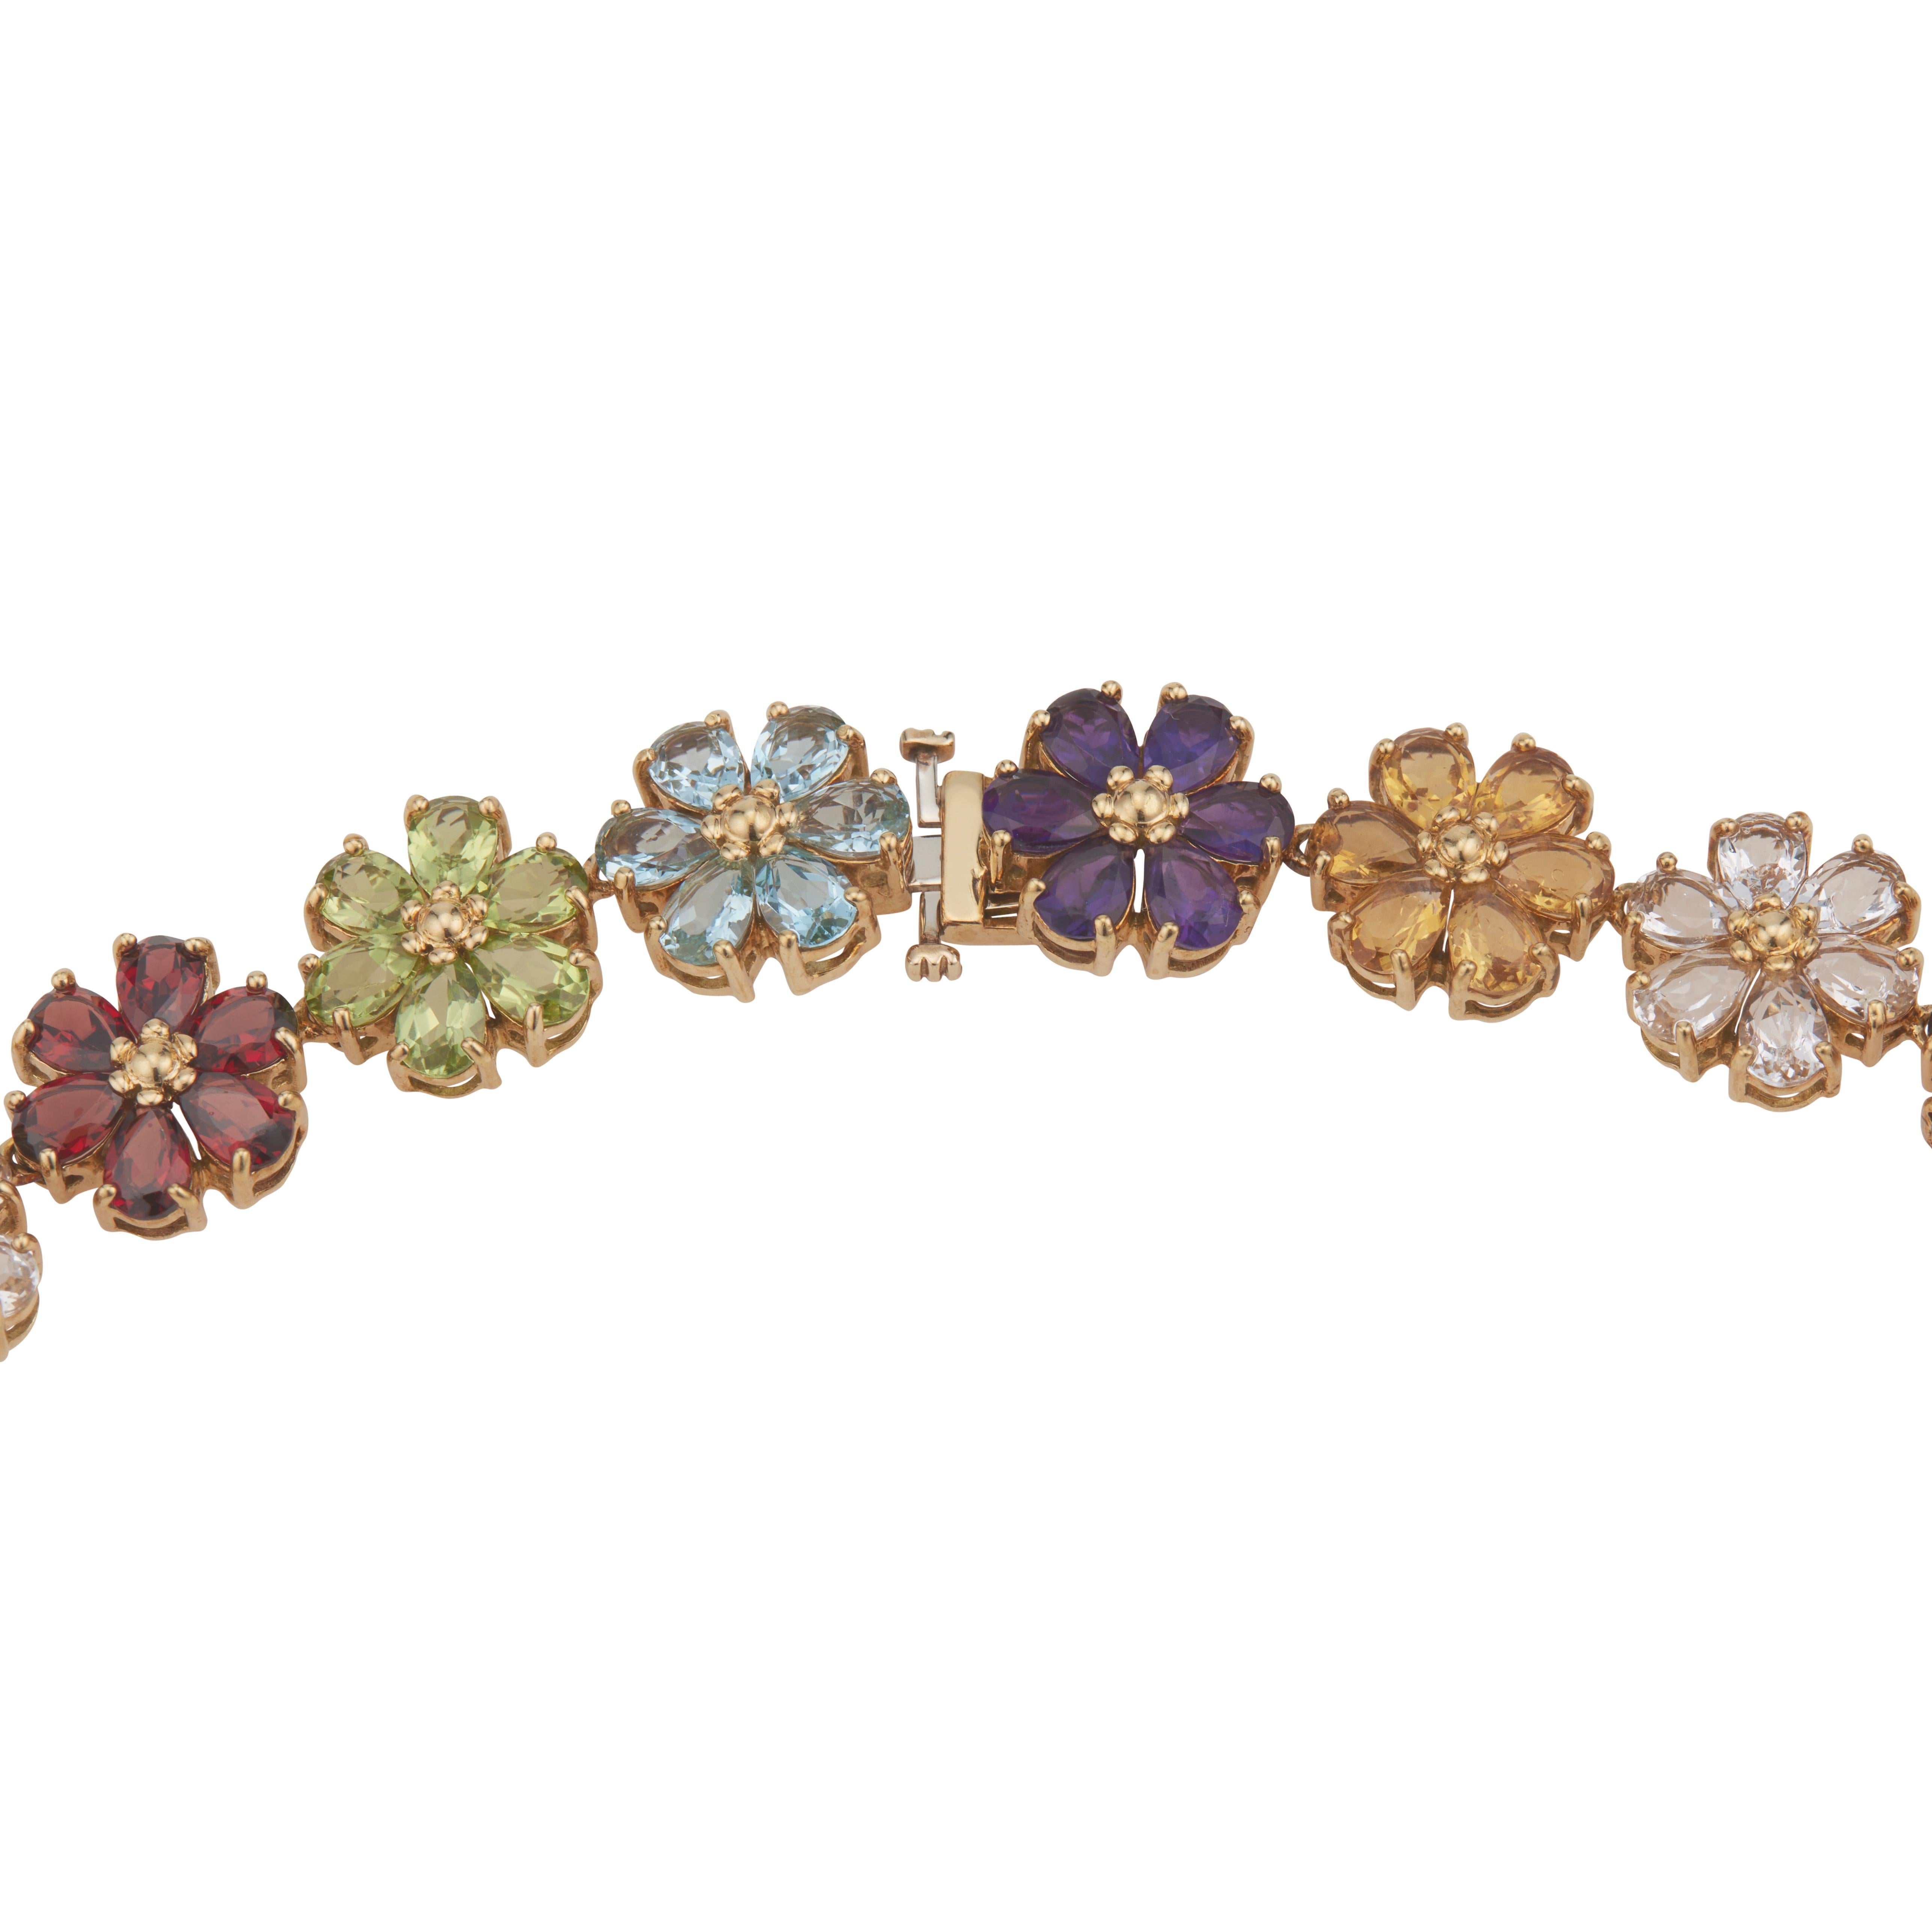 1960's Multi-stone gold necklace. Amethyst, Citrine, Topaz, Garnet, Peridot and white Topaz flower clusters set in 18k yellow gold. 17.50 inches in length. 

30 Pear shaped amethyst  approx. total weight 10.50cts
30 Pear shaped citrine total weight